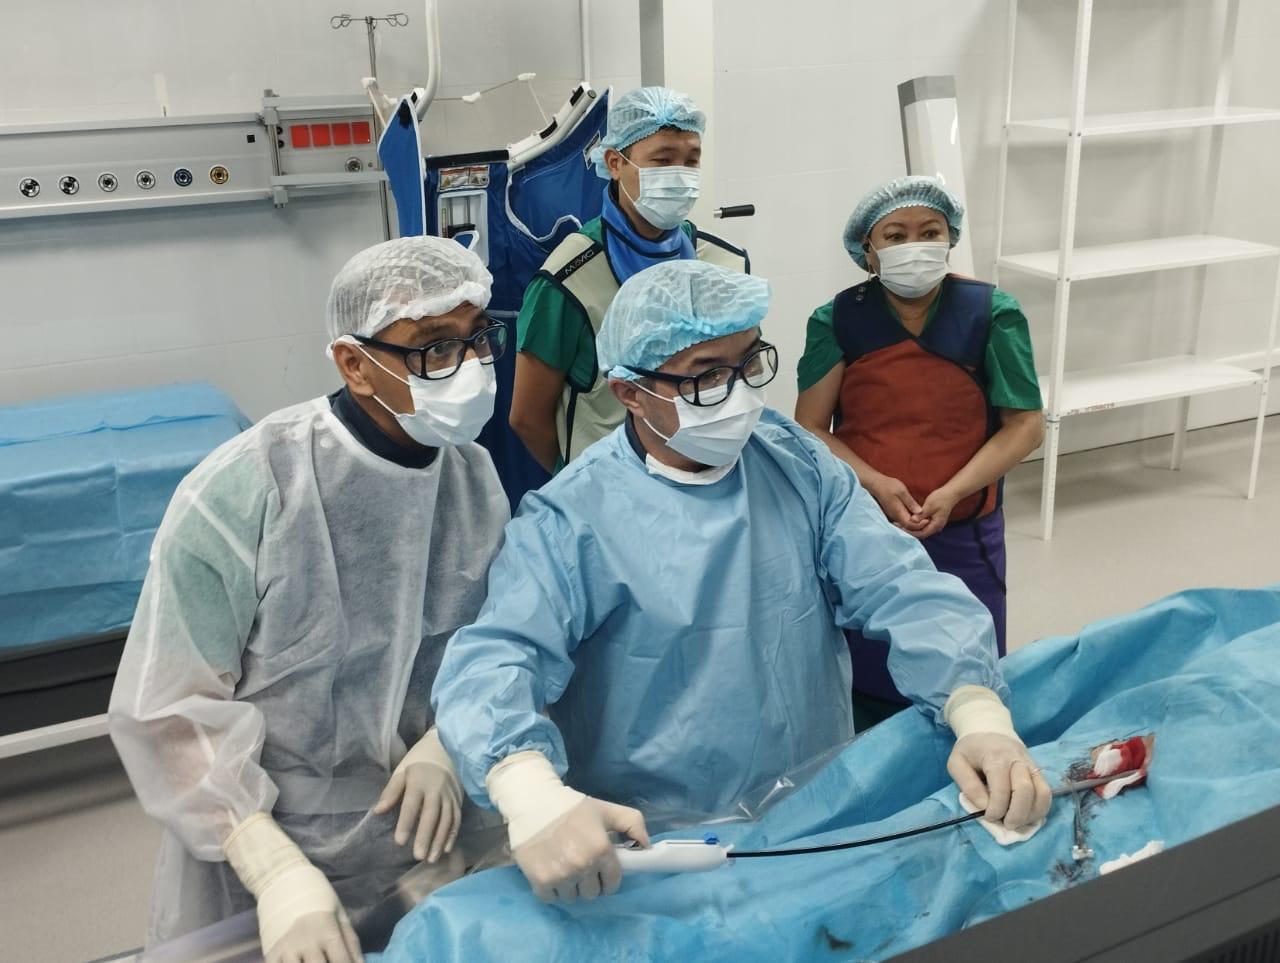 Ayan Abdrakhmanov, chief arrhythmologist of Medical Center Hospital of the President’s Affairs Administration of the Republic of Kazakhstan, showed a master class on 3 surgeries at an International Conference in Pavlodar